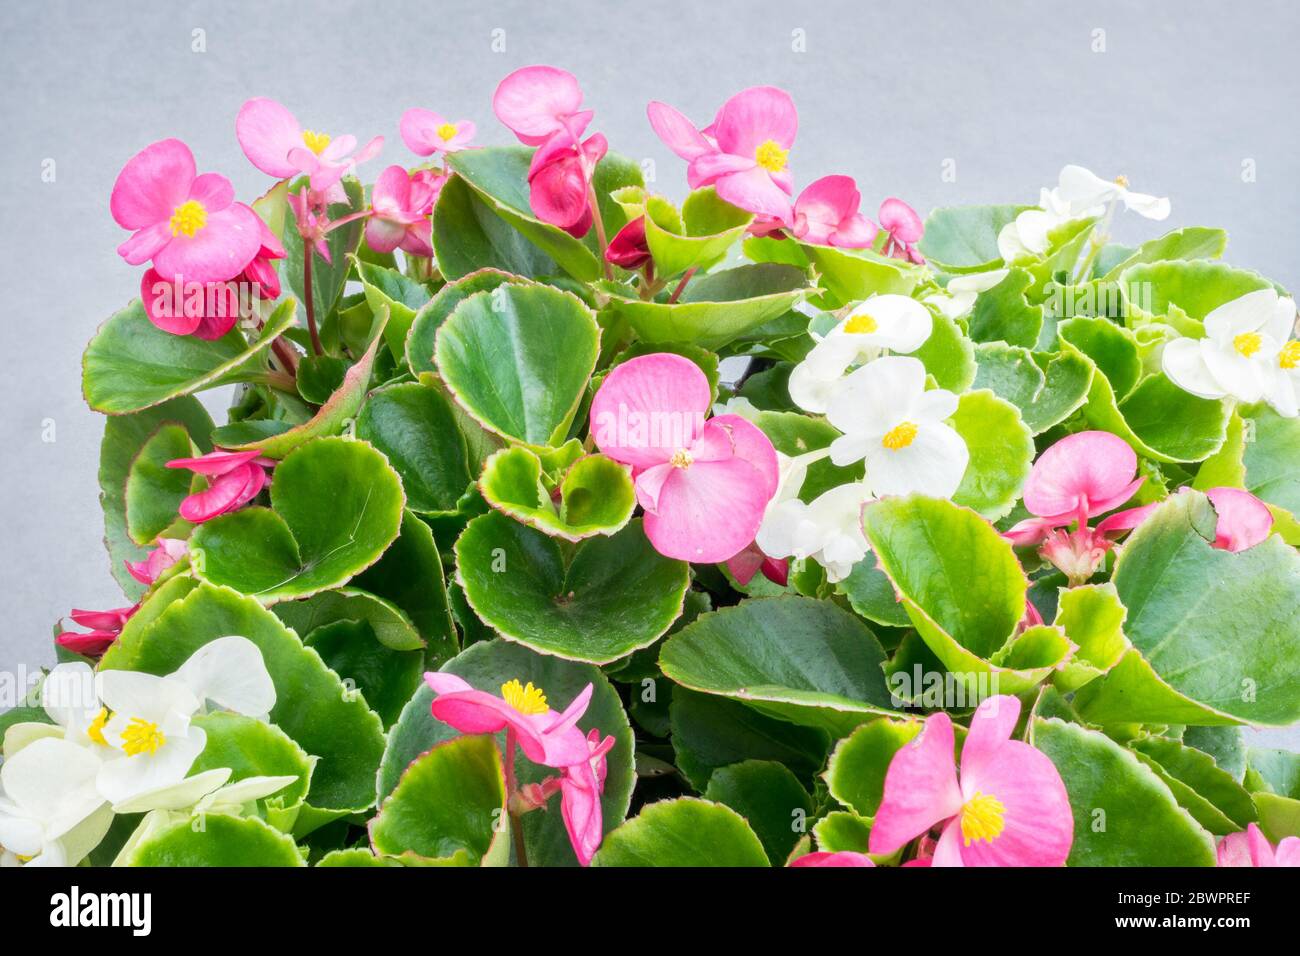 Wax Begonia with pink and white flowers. Begonia cucullata, also known as Begonia semperflorens. Blurred background. Stock Photo